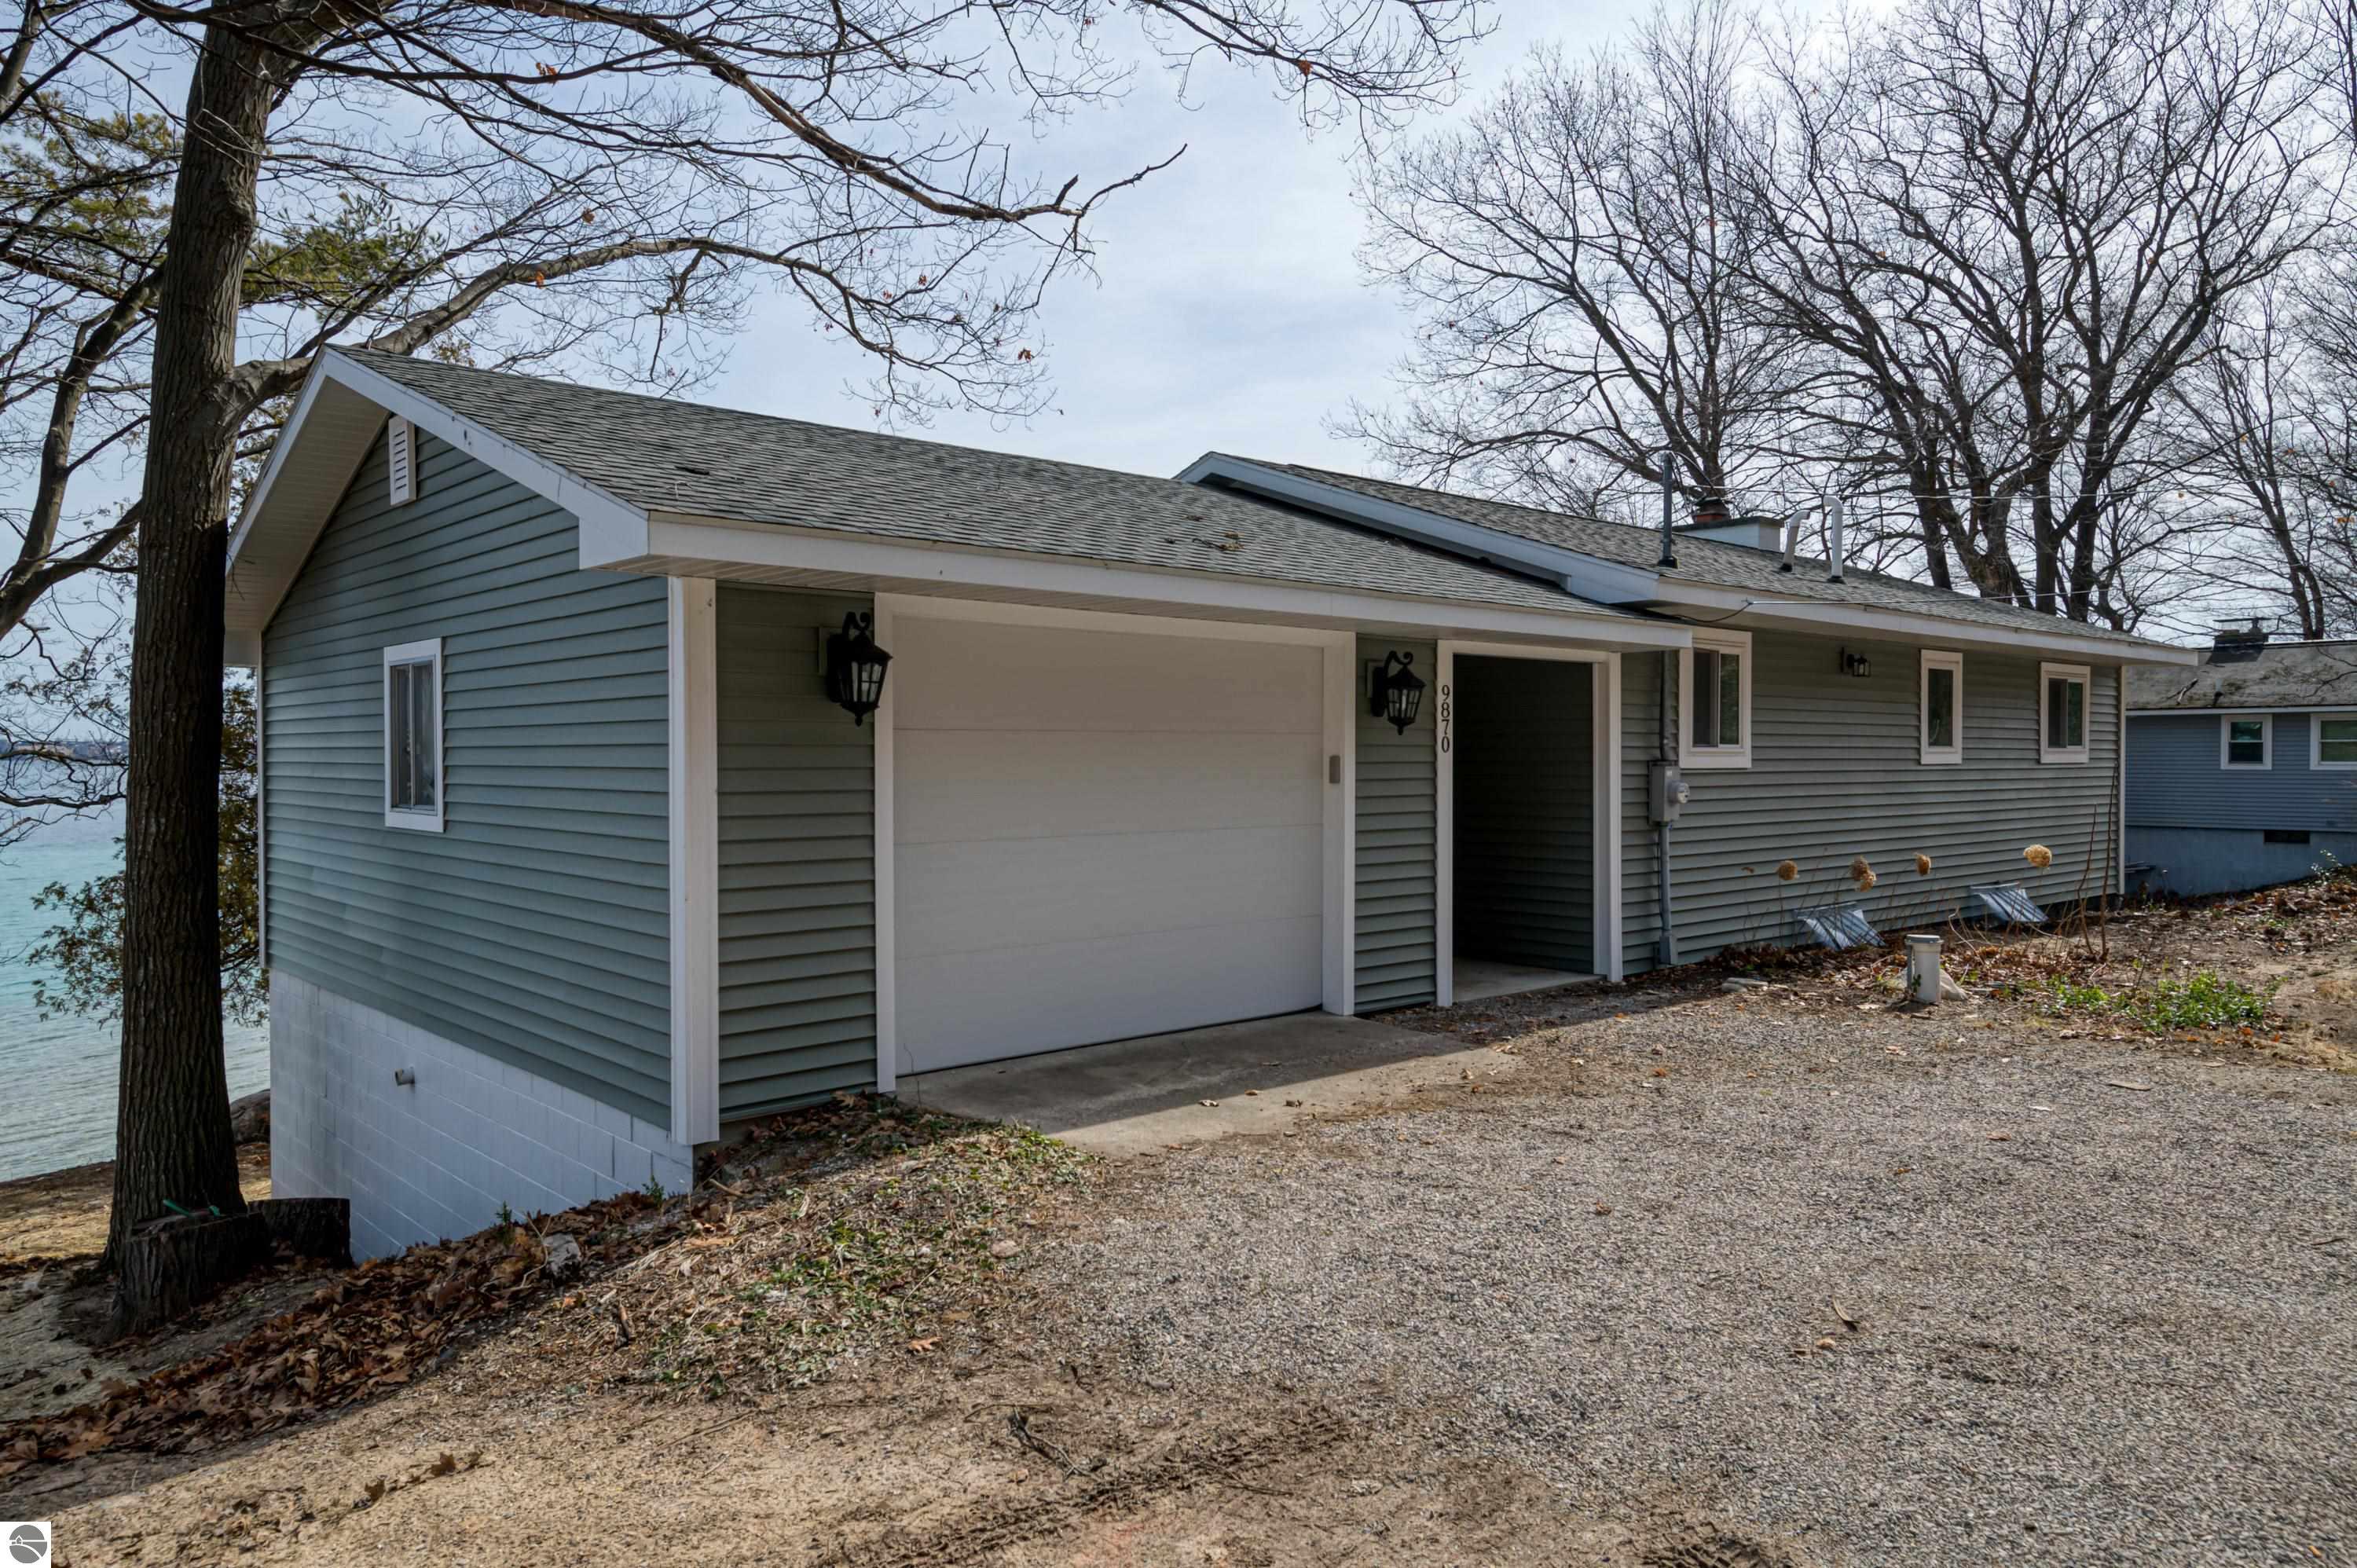 9870 Center Road, Traverse City, Michigan, 49686, United States, 2 Bedrooms Bedrooms, ,1 BathroomBathrooms,Residential,For Sale,9870 Center Road,1479554